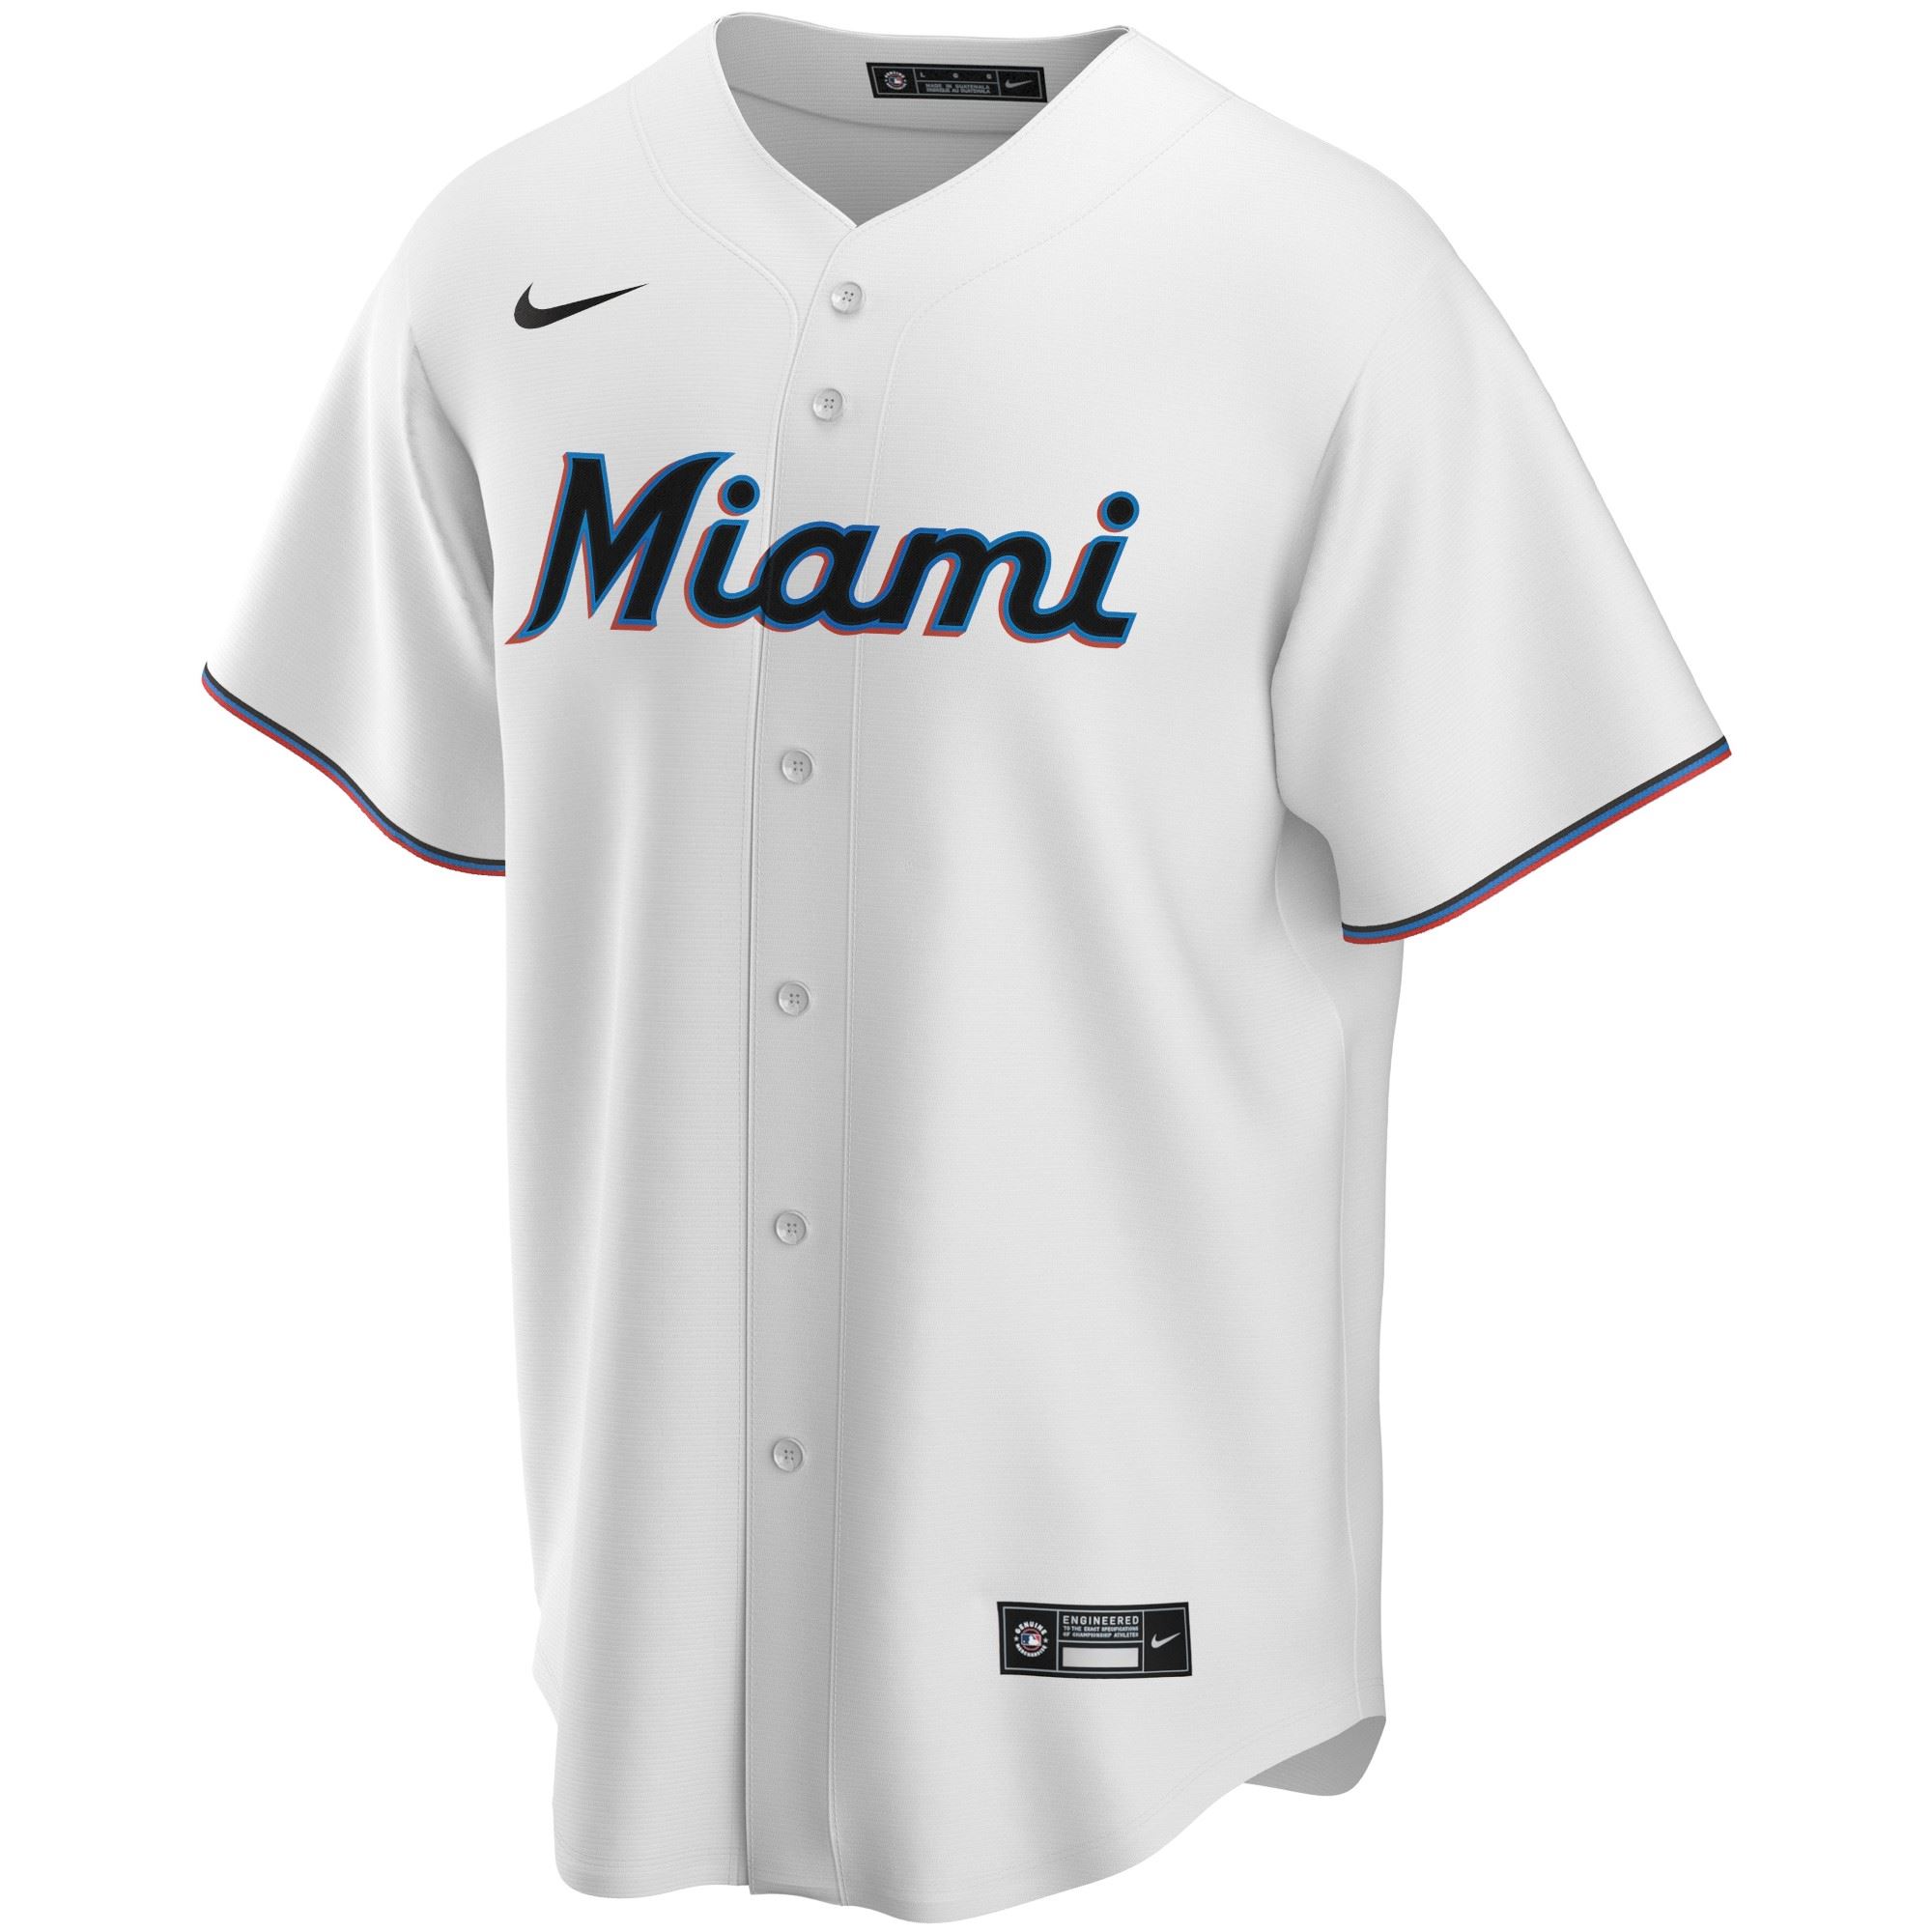 Miami Marlins Official MLB Replica Home Jersey White Nike